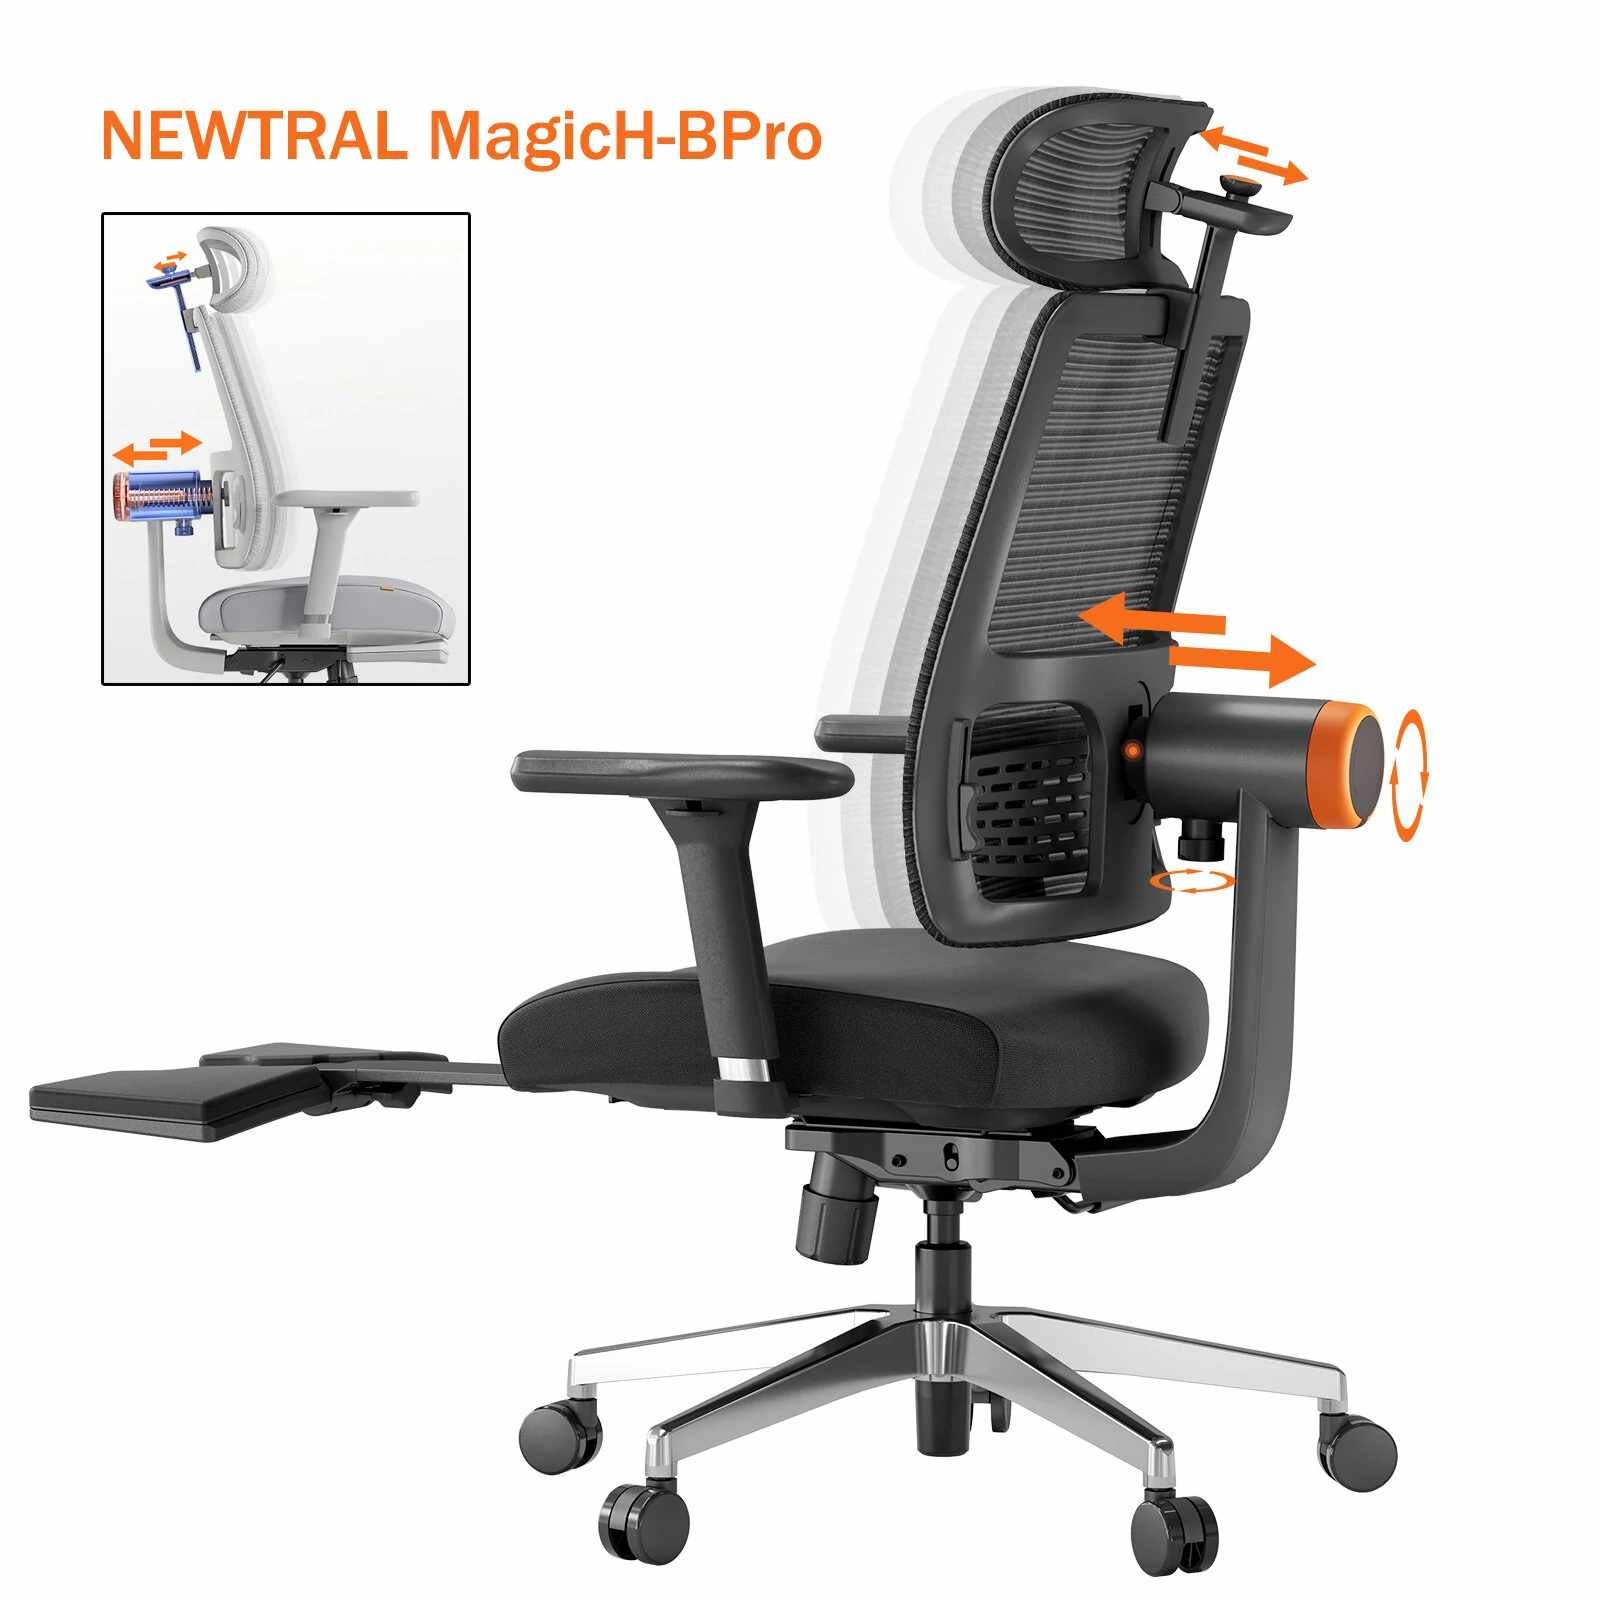 NEWTRAL MagicH-BPro Ergonomic Chair with Footrest Banggood Coupon Promo Code (CZ Warehouse)